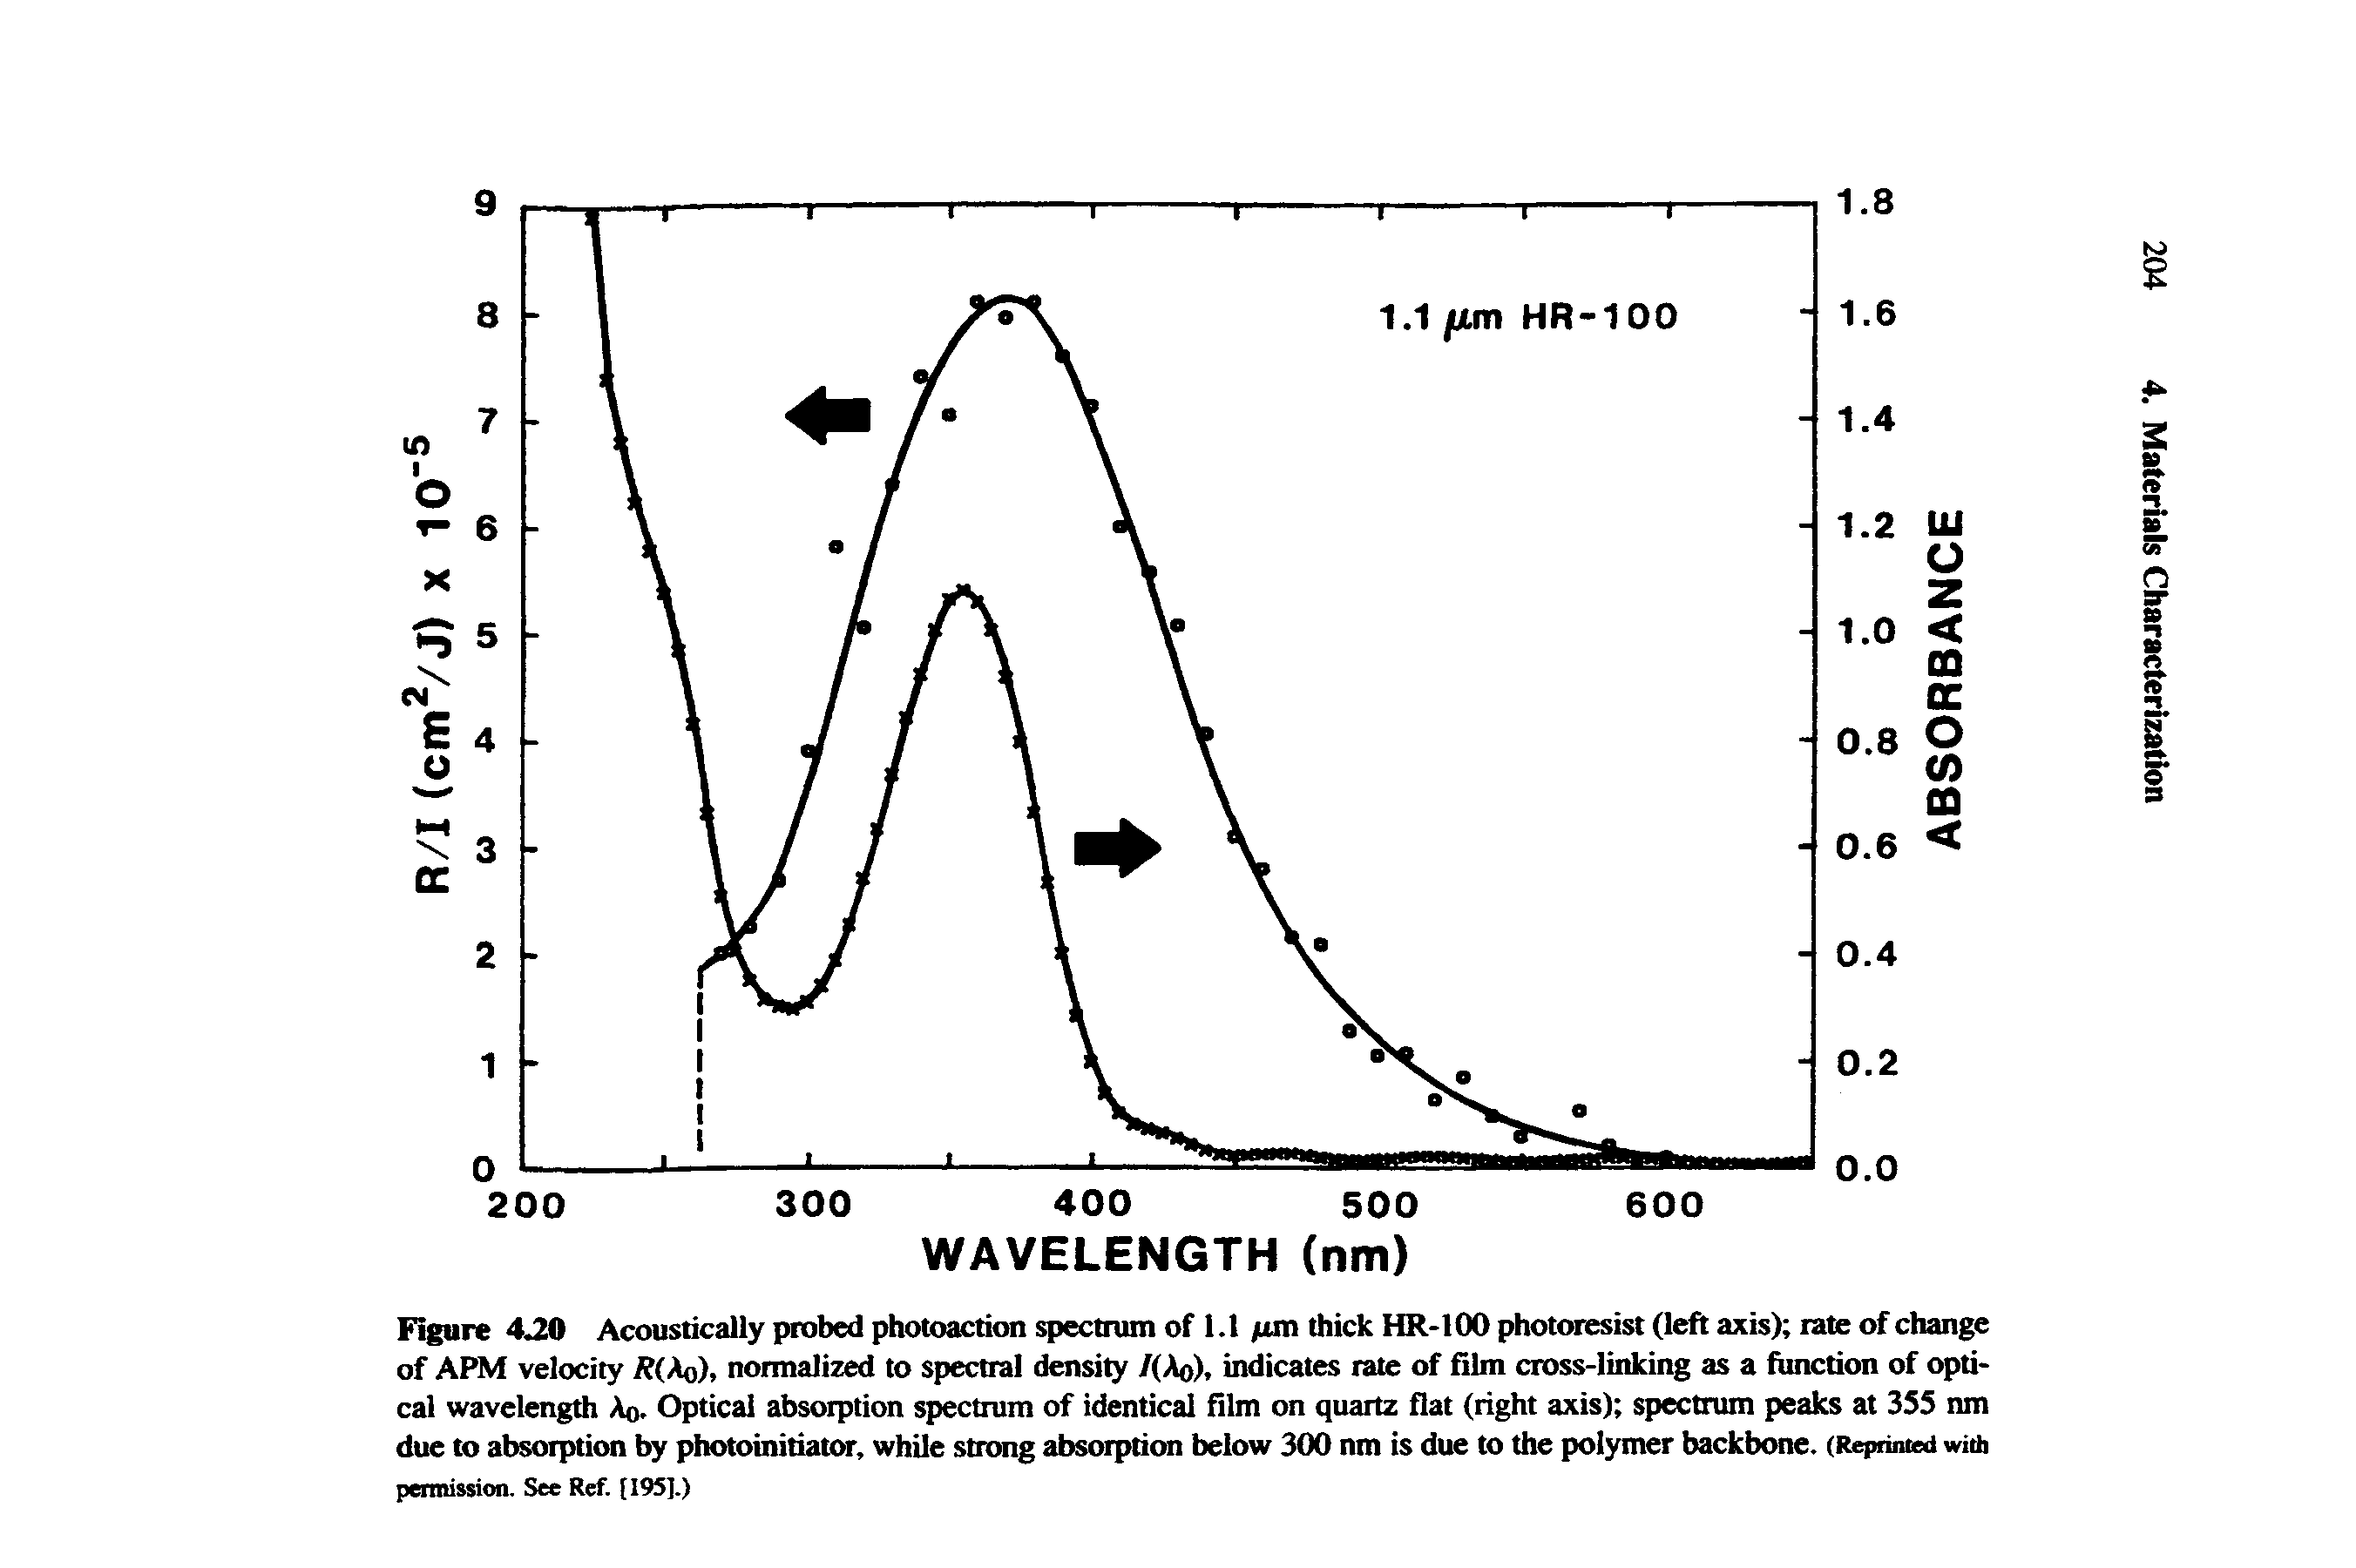 Figure 4 Acoustically probed photoactkm spectrum of 1.1 fun thick HR-100 photoresist (left axis) rale of change of APM velocity R(Ao), normalized to spectral density /( )> indicates rale of film cross-linking as a function of optical wavelength Ao. Optical absorption spectrum of identical Him on quartz flat (right axis) spectrum peaks at 3SS nm due to absorption by photoinitiator, while strong absorption below 300 nm is due to the polymer backbone. (Reprinied wiUi pennission. See Ref. [195].)...